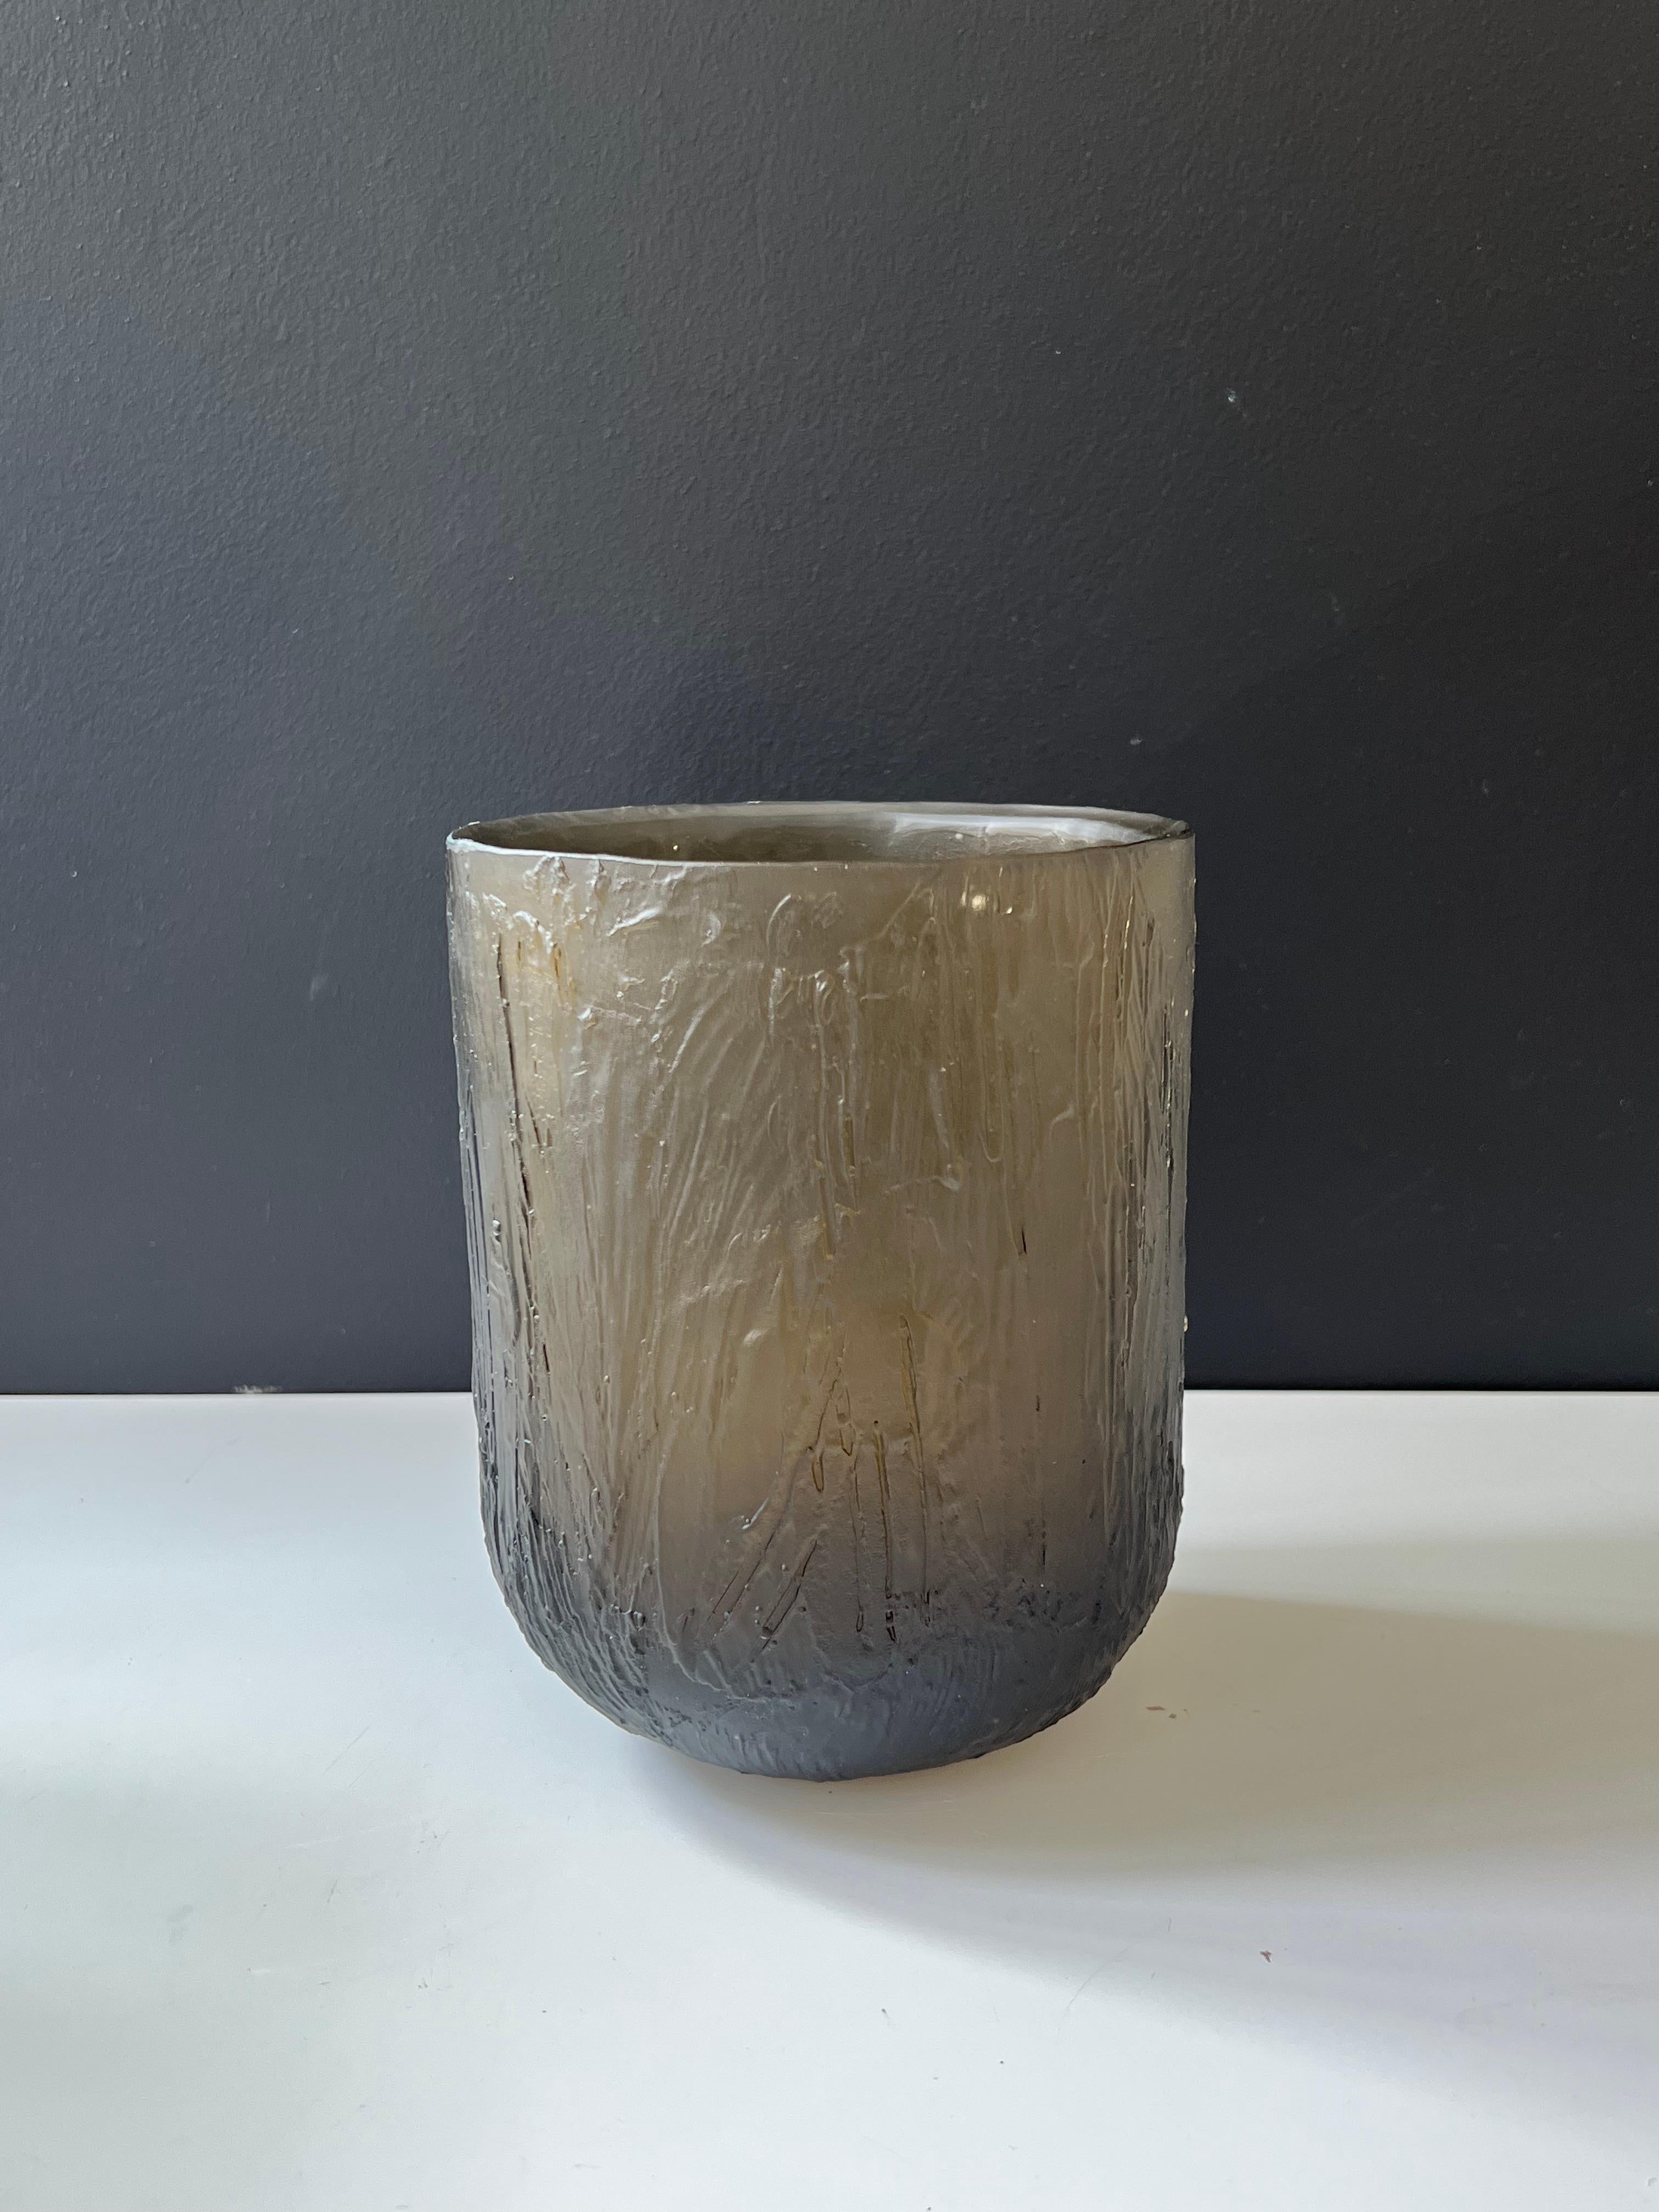 A unique cast glass vase in olive color. With intricate hand-sculpted details on its surface, resembling the trunk of a tree , the vase is sculptural as well as functional. With 20 cm / 7.7'' height, it works well with many types of flowers whether